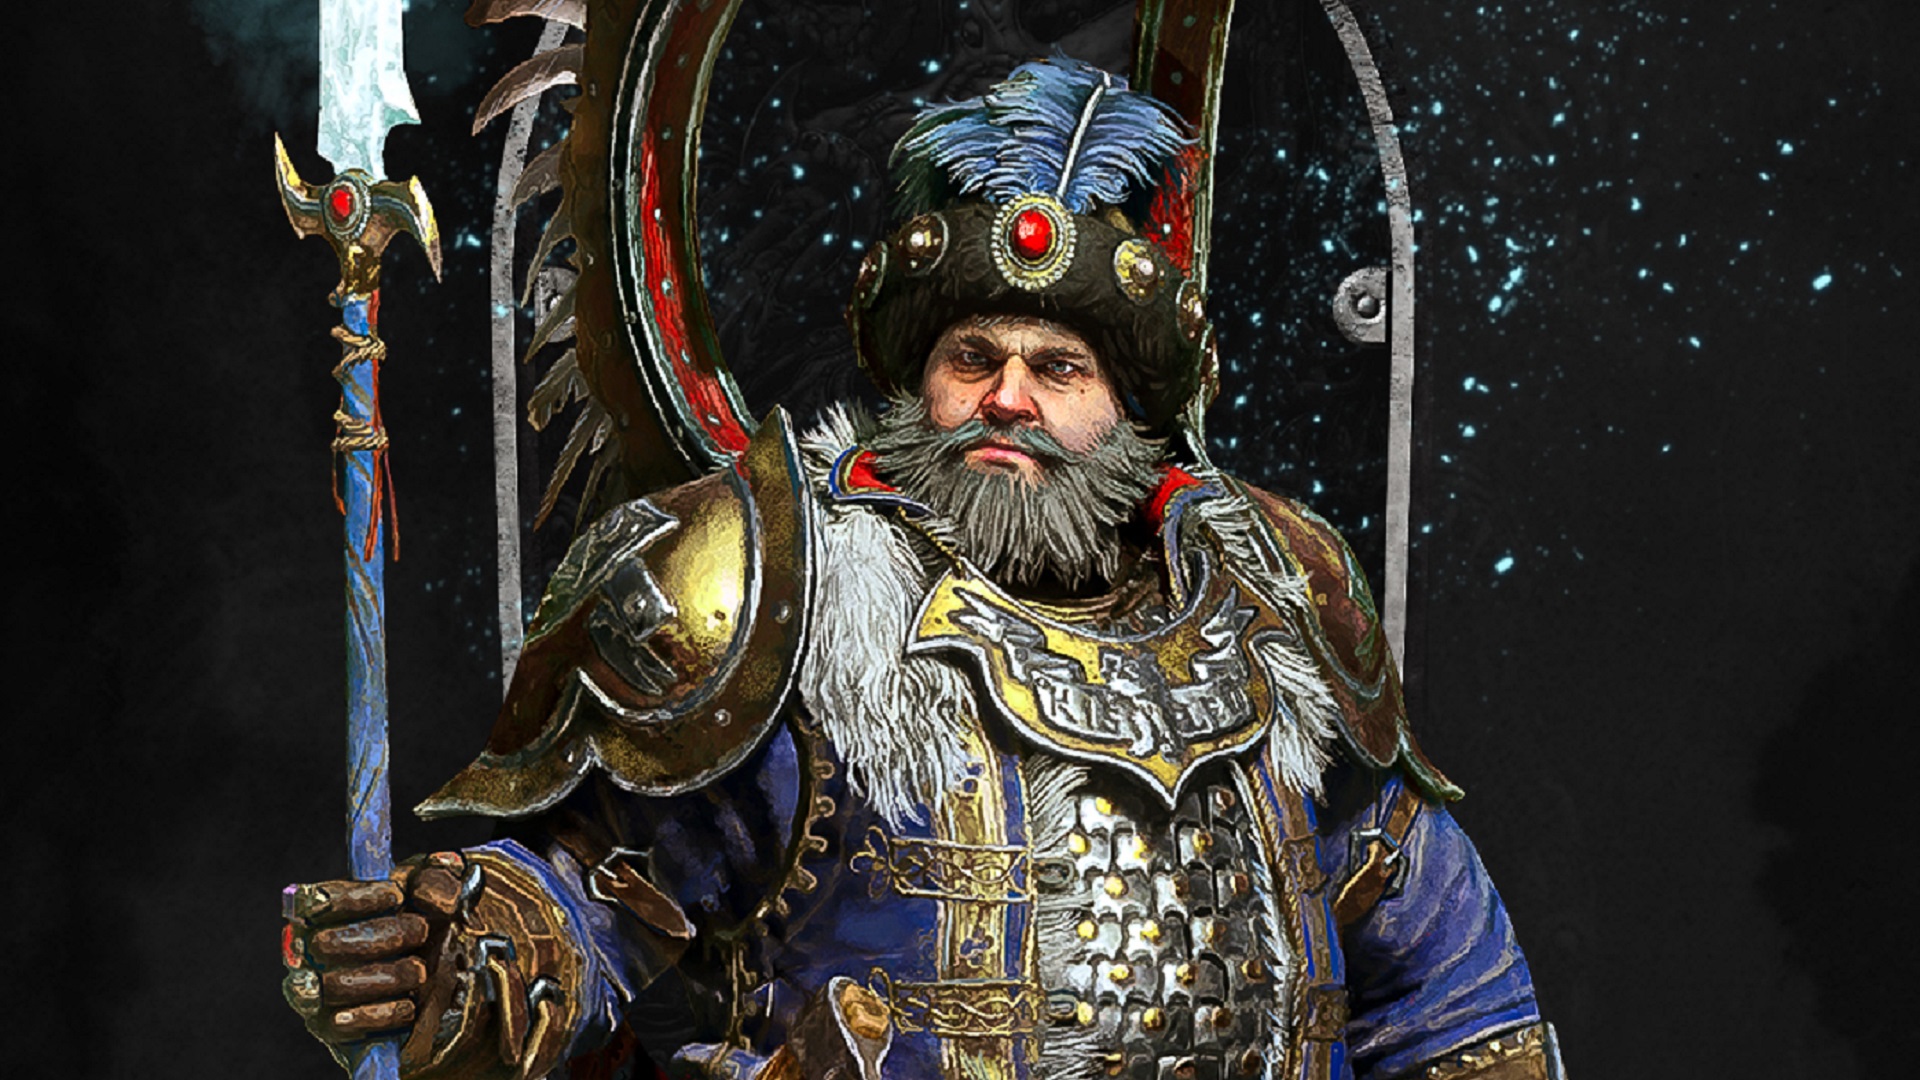 The Total Warhammer 3 Immortal Empires mod adds lots of landmark lore